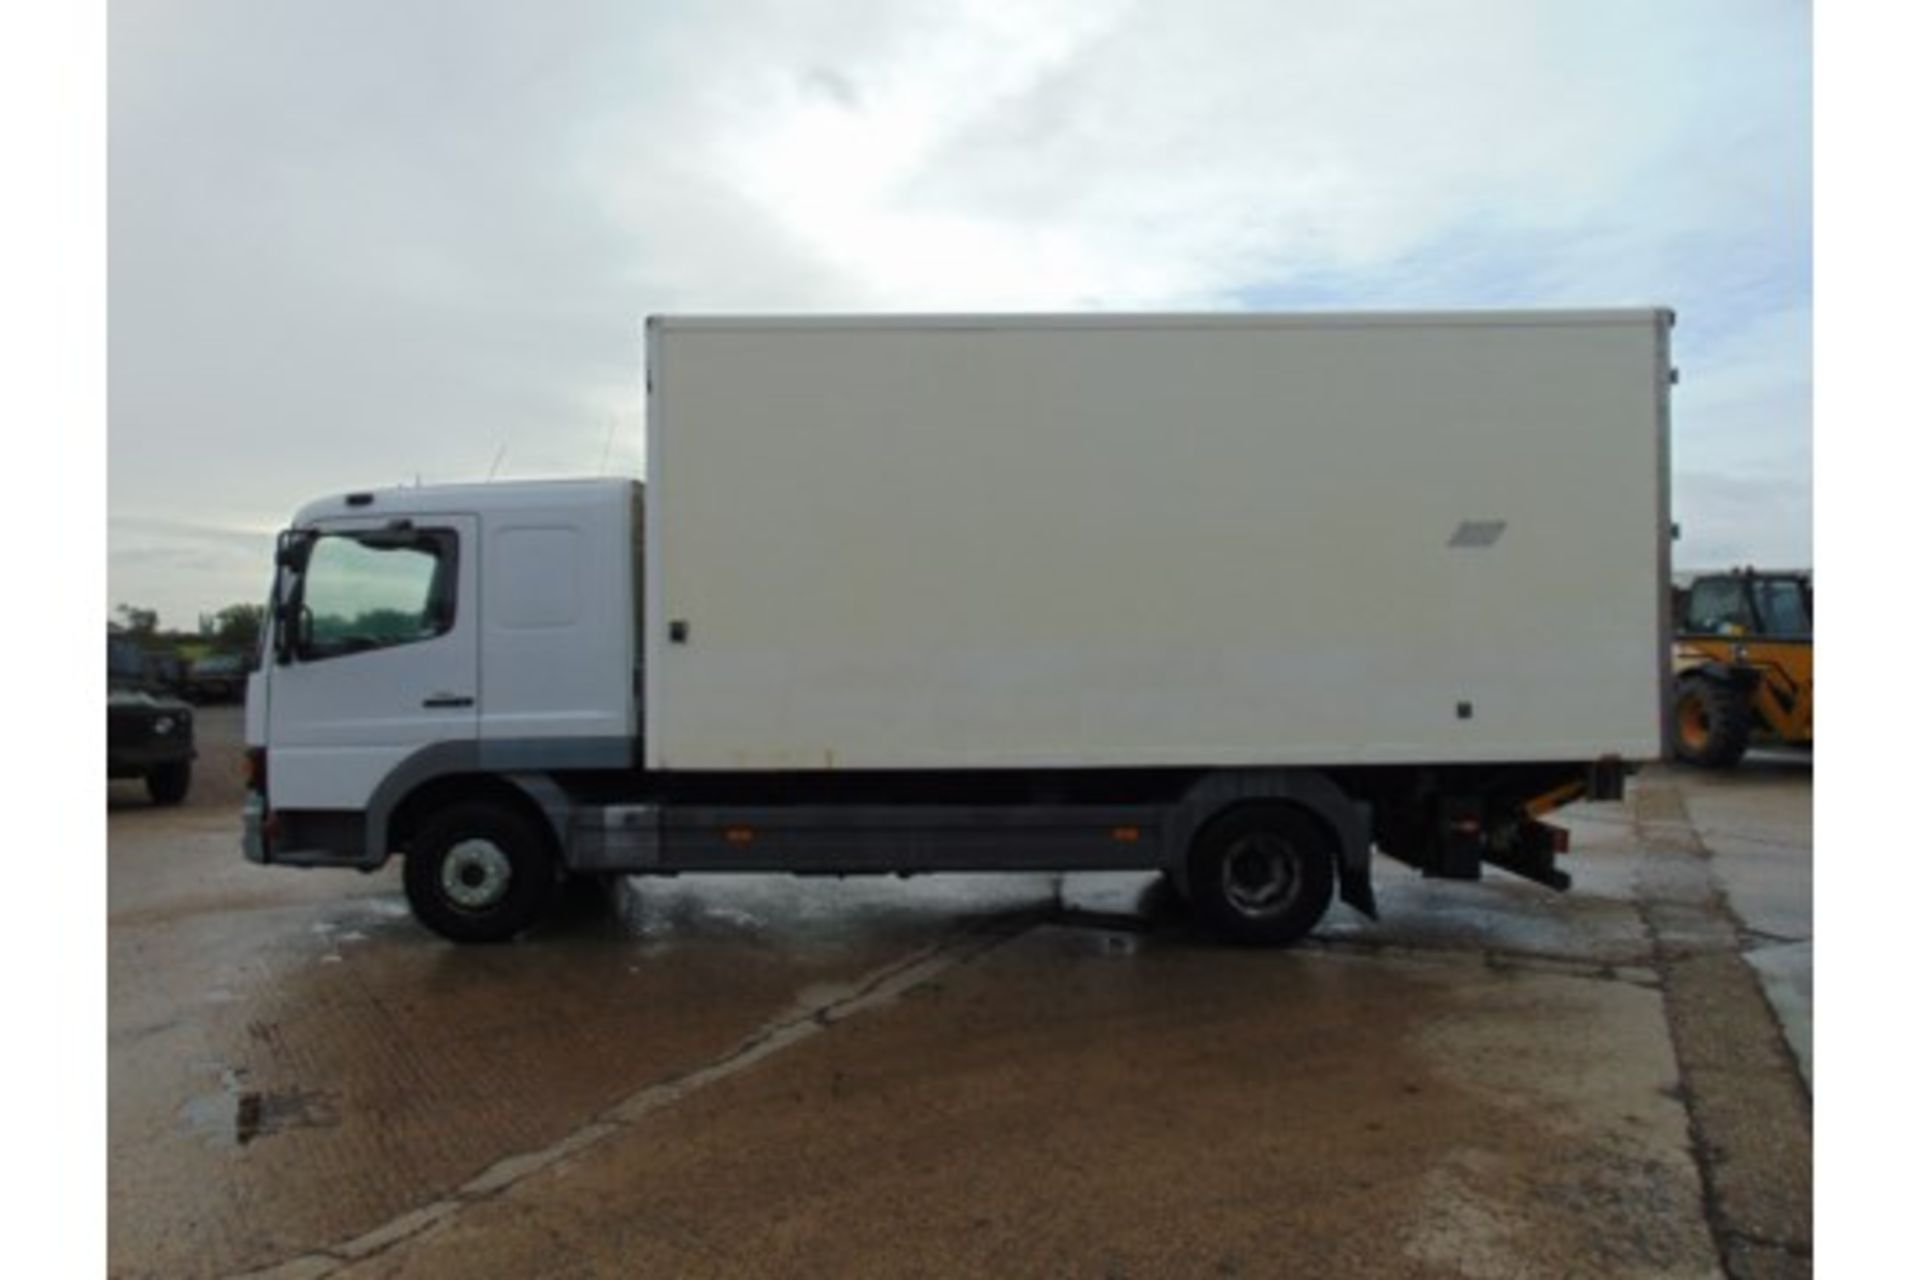 2001 Mercedes Benz Atego 1018 Box Truck C/W Tail Lift - Image 4 of 21